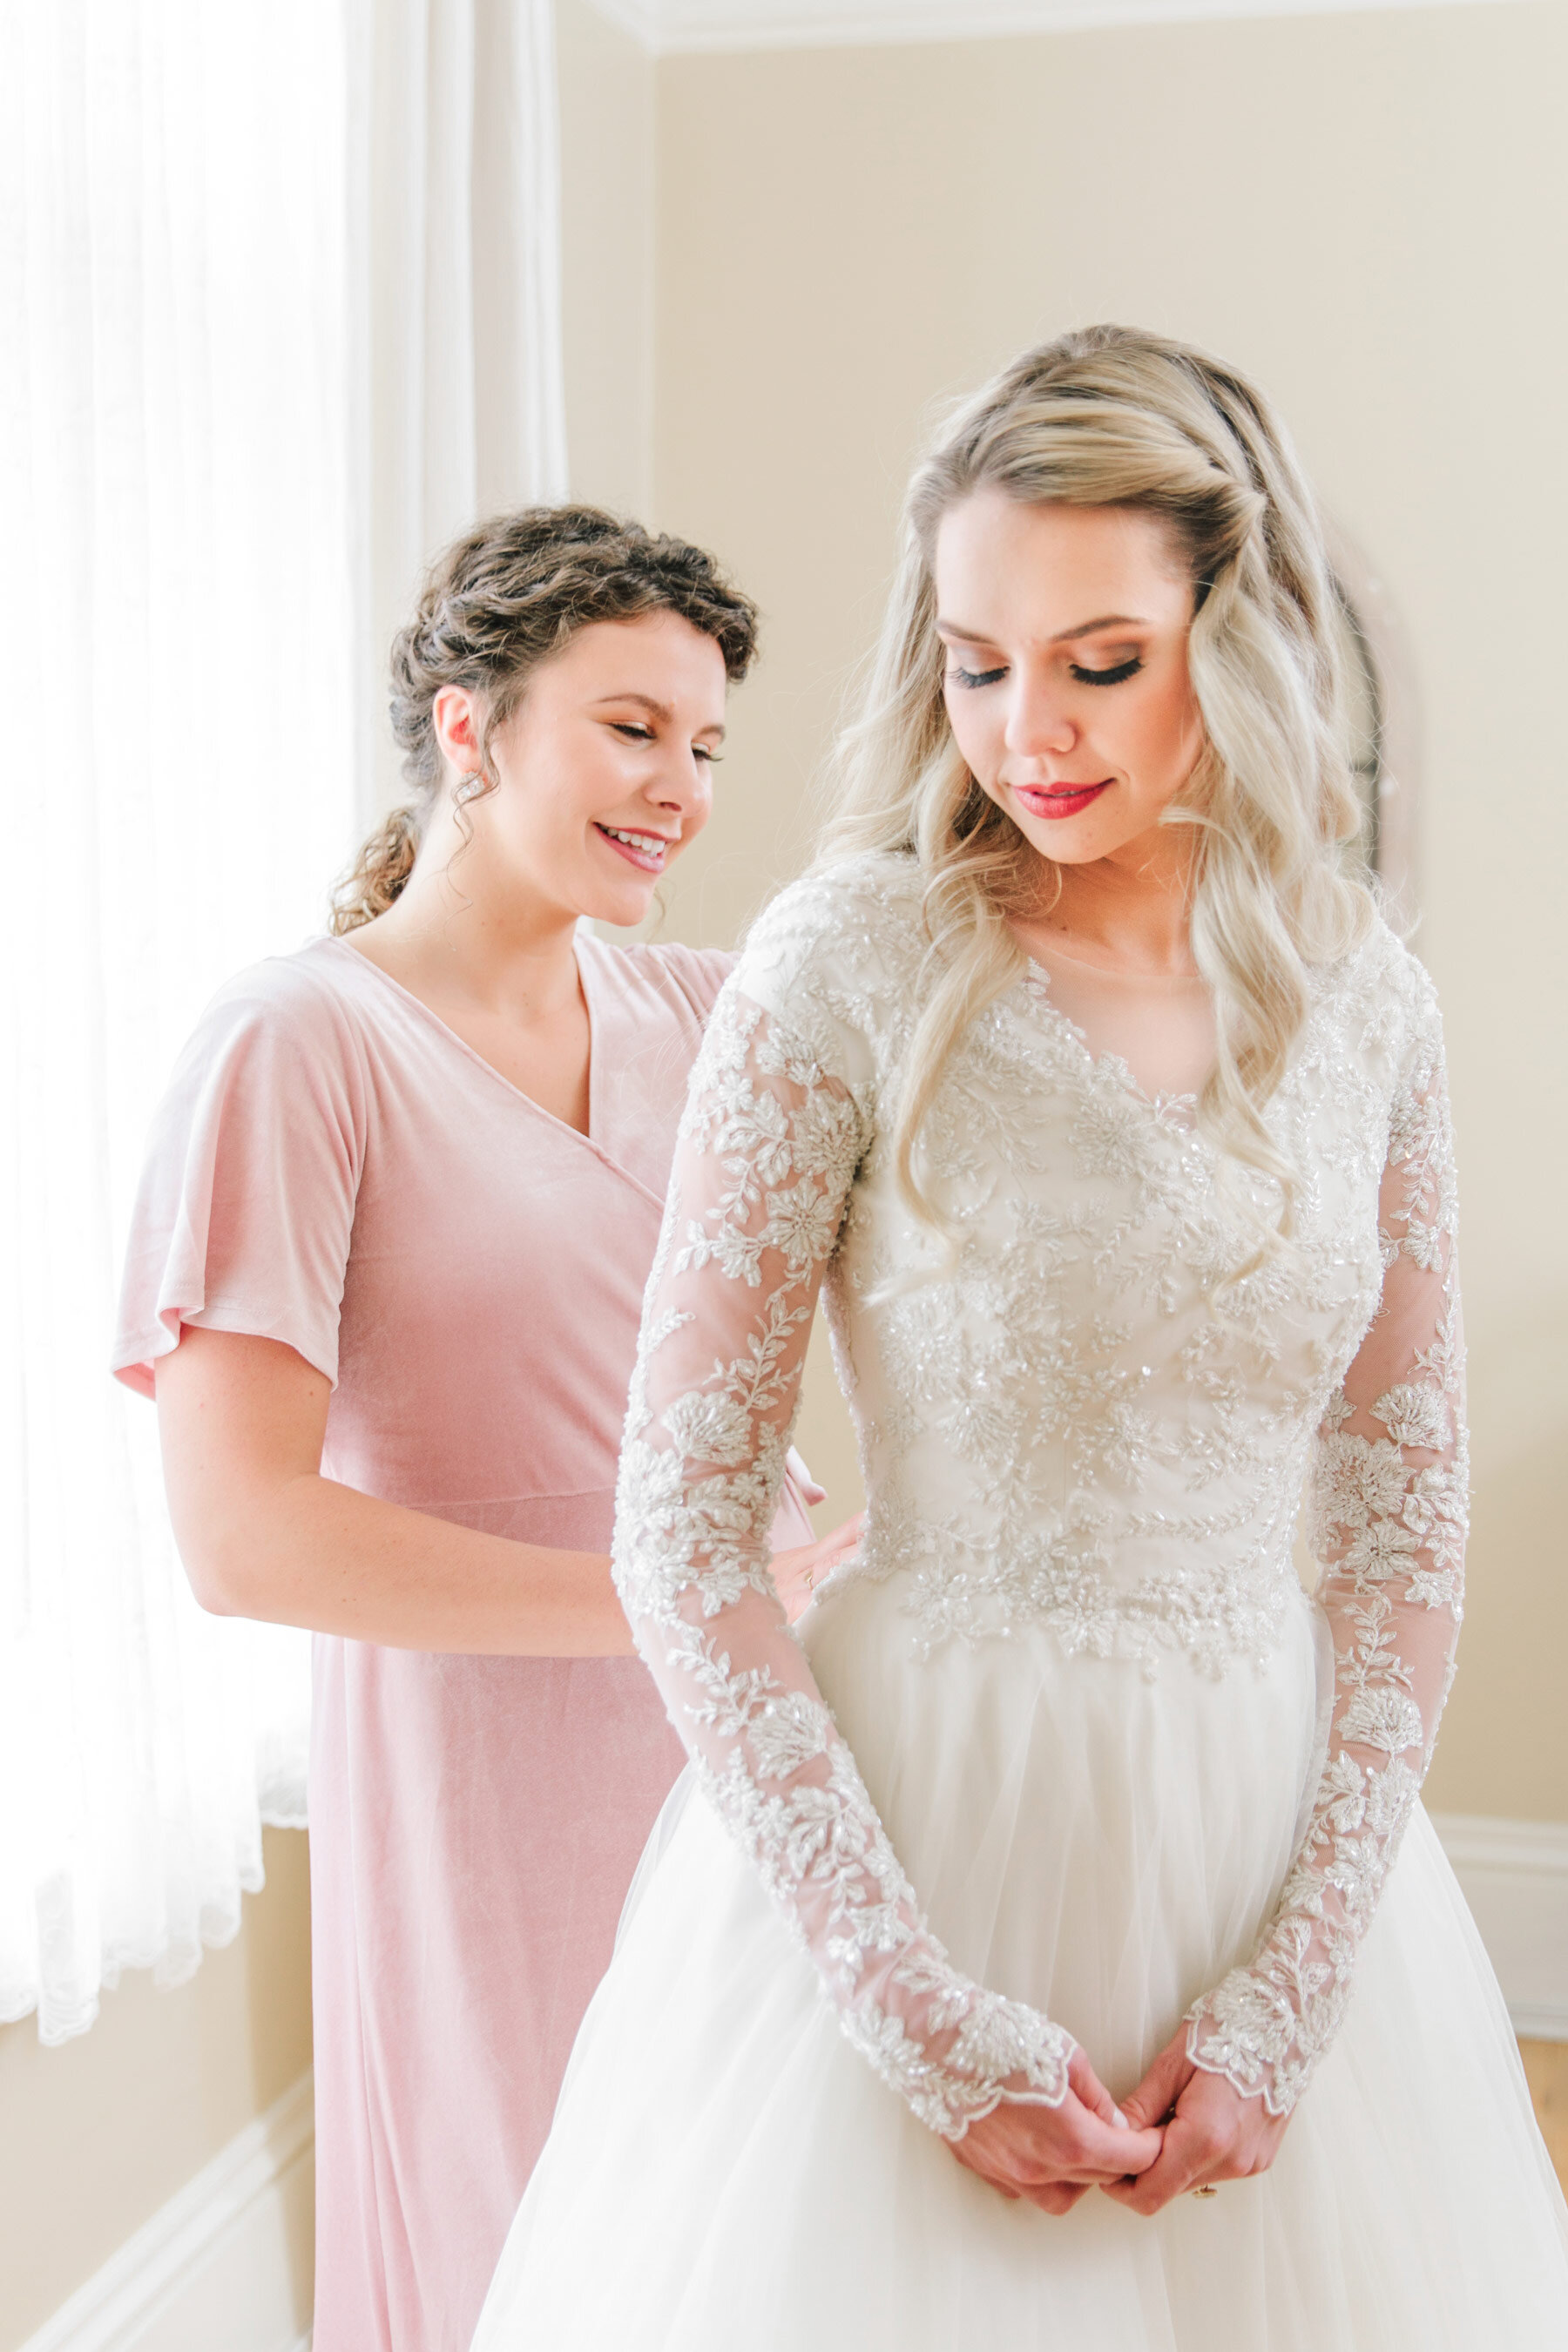  On her wedding morning,  wedding photographer, Clarity Lane captures this bridesmaid button up this bride's wedding dress. Salt Lake City wedding photographer lace long sleeve ivory modest wedding dress platinum blonde women's hair color light pink 